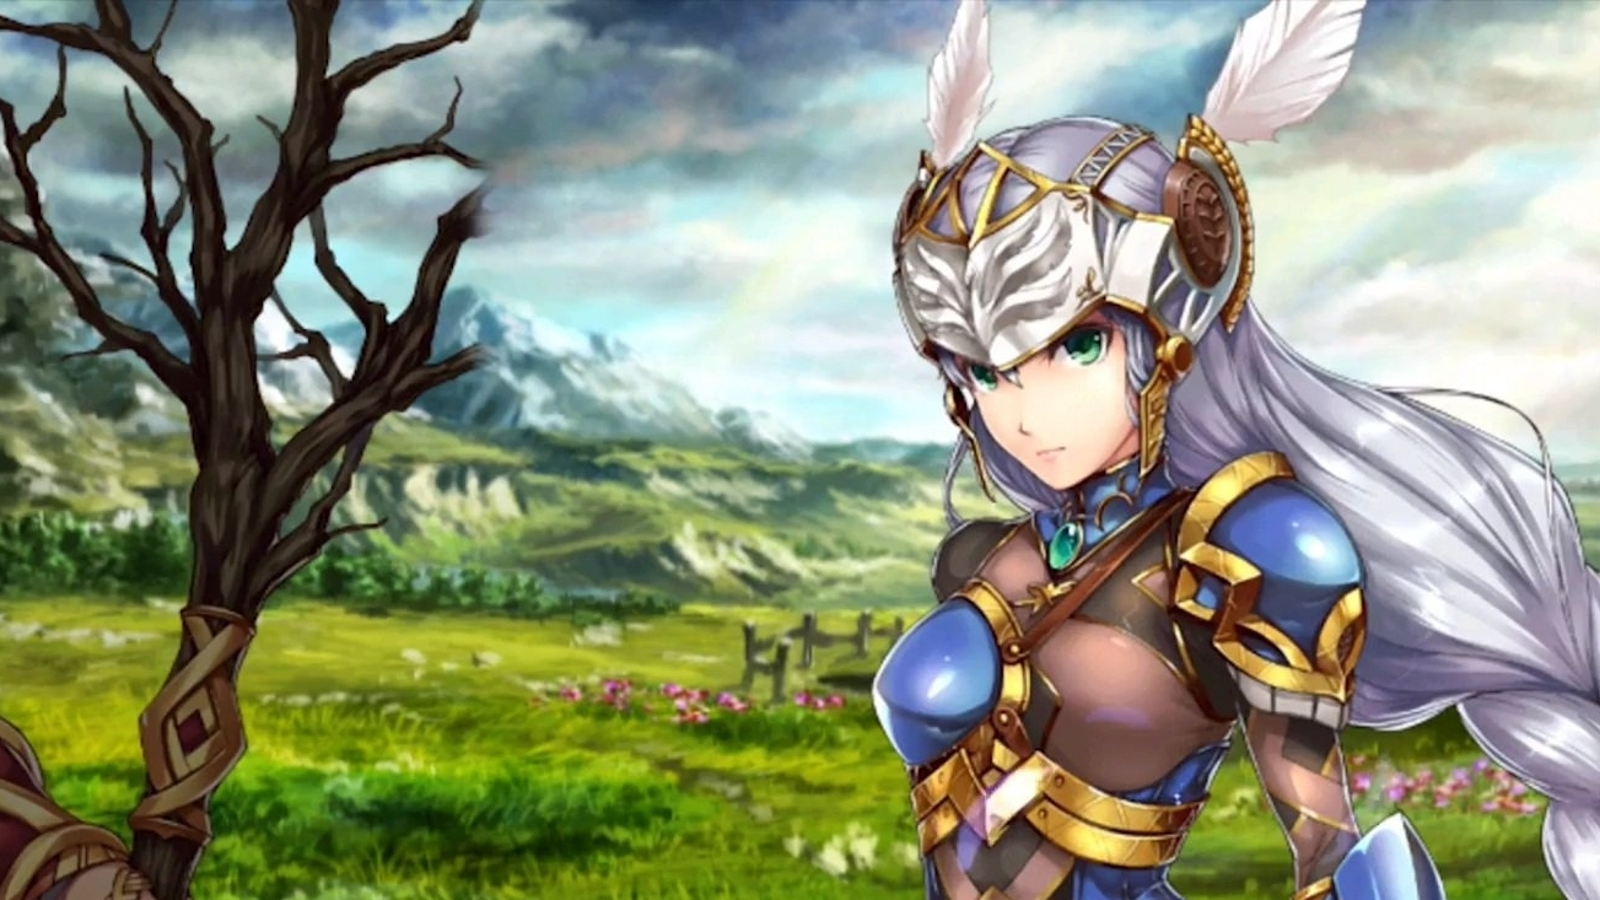 Valkyrie Anatomia developer teases new large-scale RPG for PlayStation 4